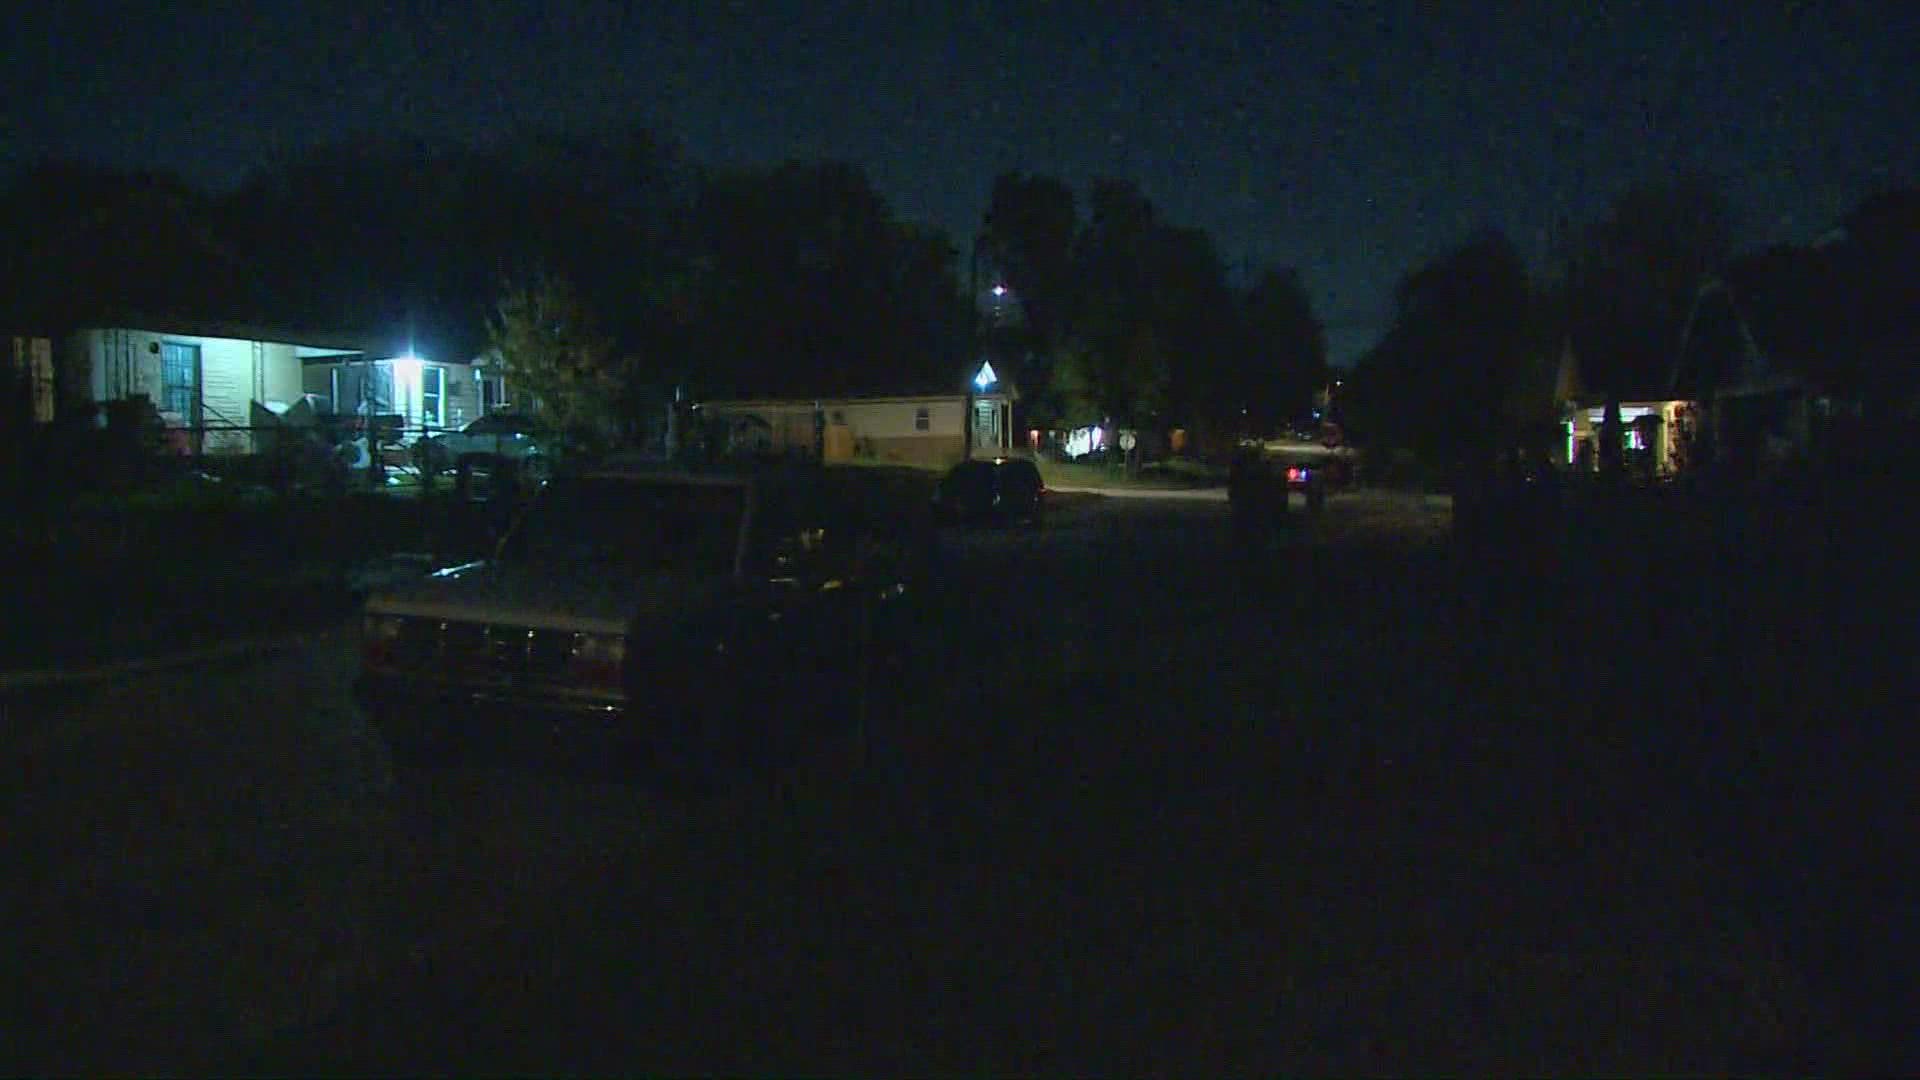 A 10-year-old boy has been hospitalized after a drive-by shooting at a home in Fort Worth on Monday night, police said.